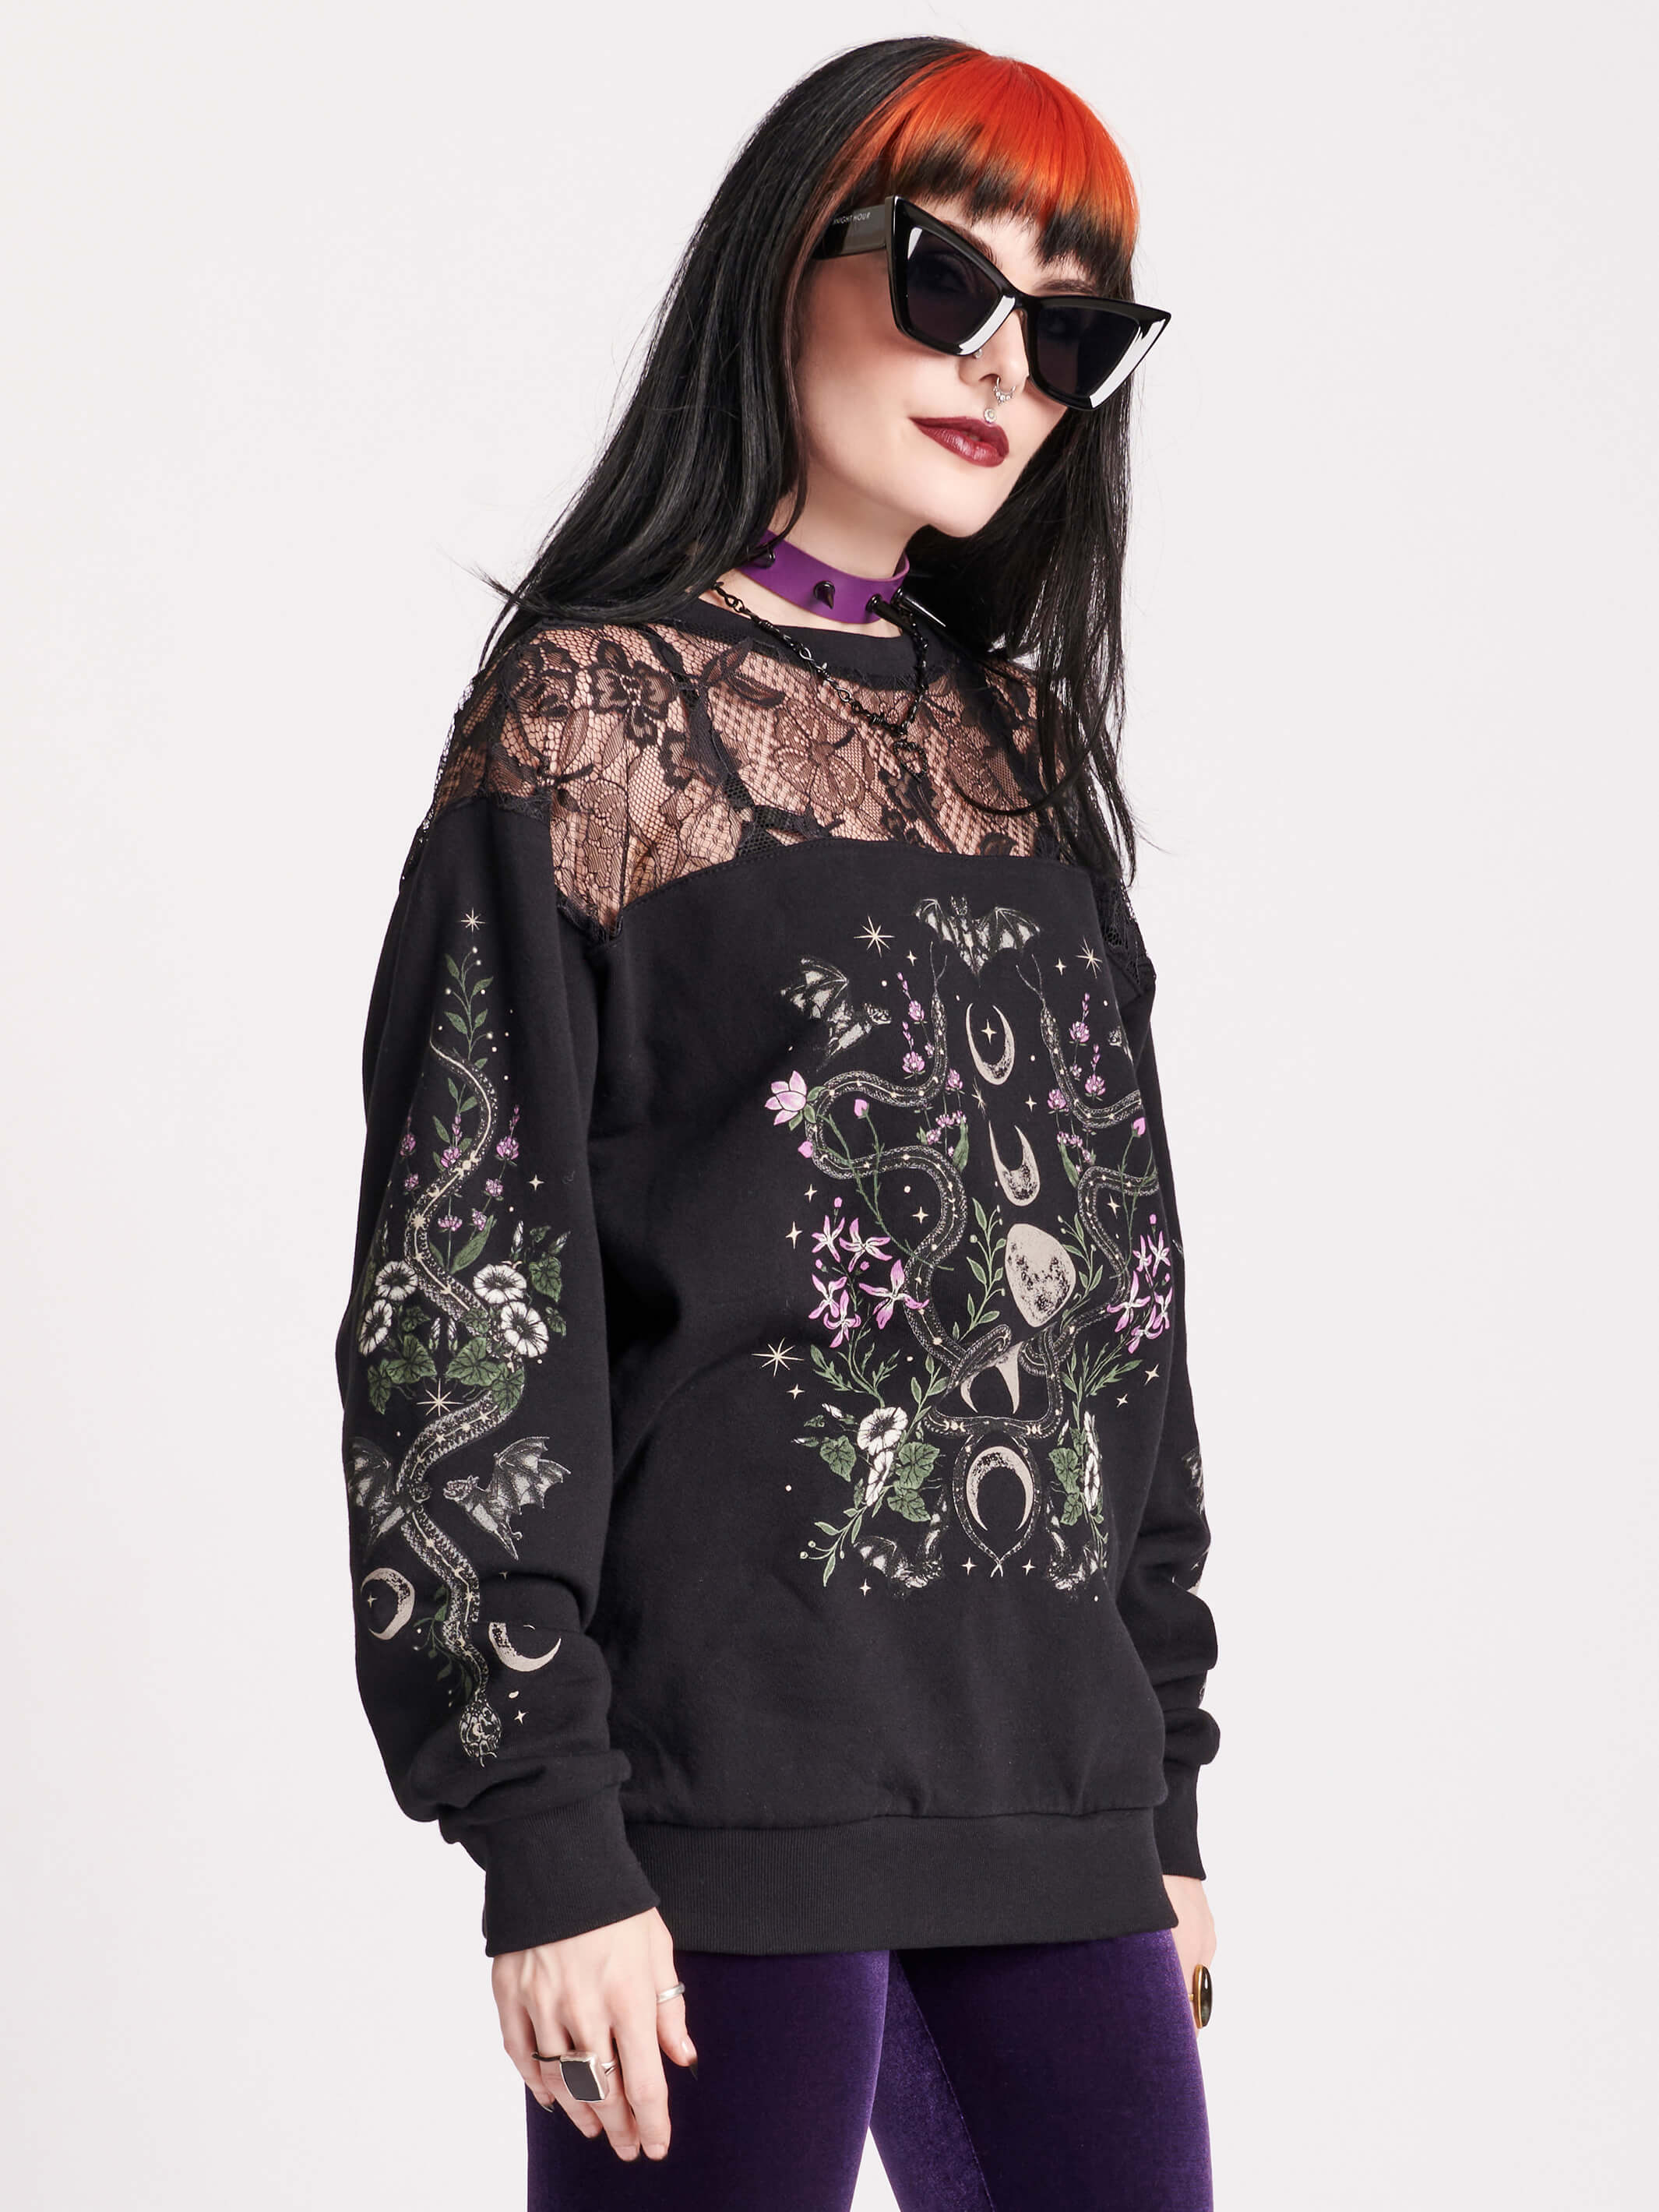 LACE DETAIL SWEATER WITH PRINT